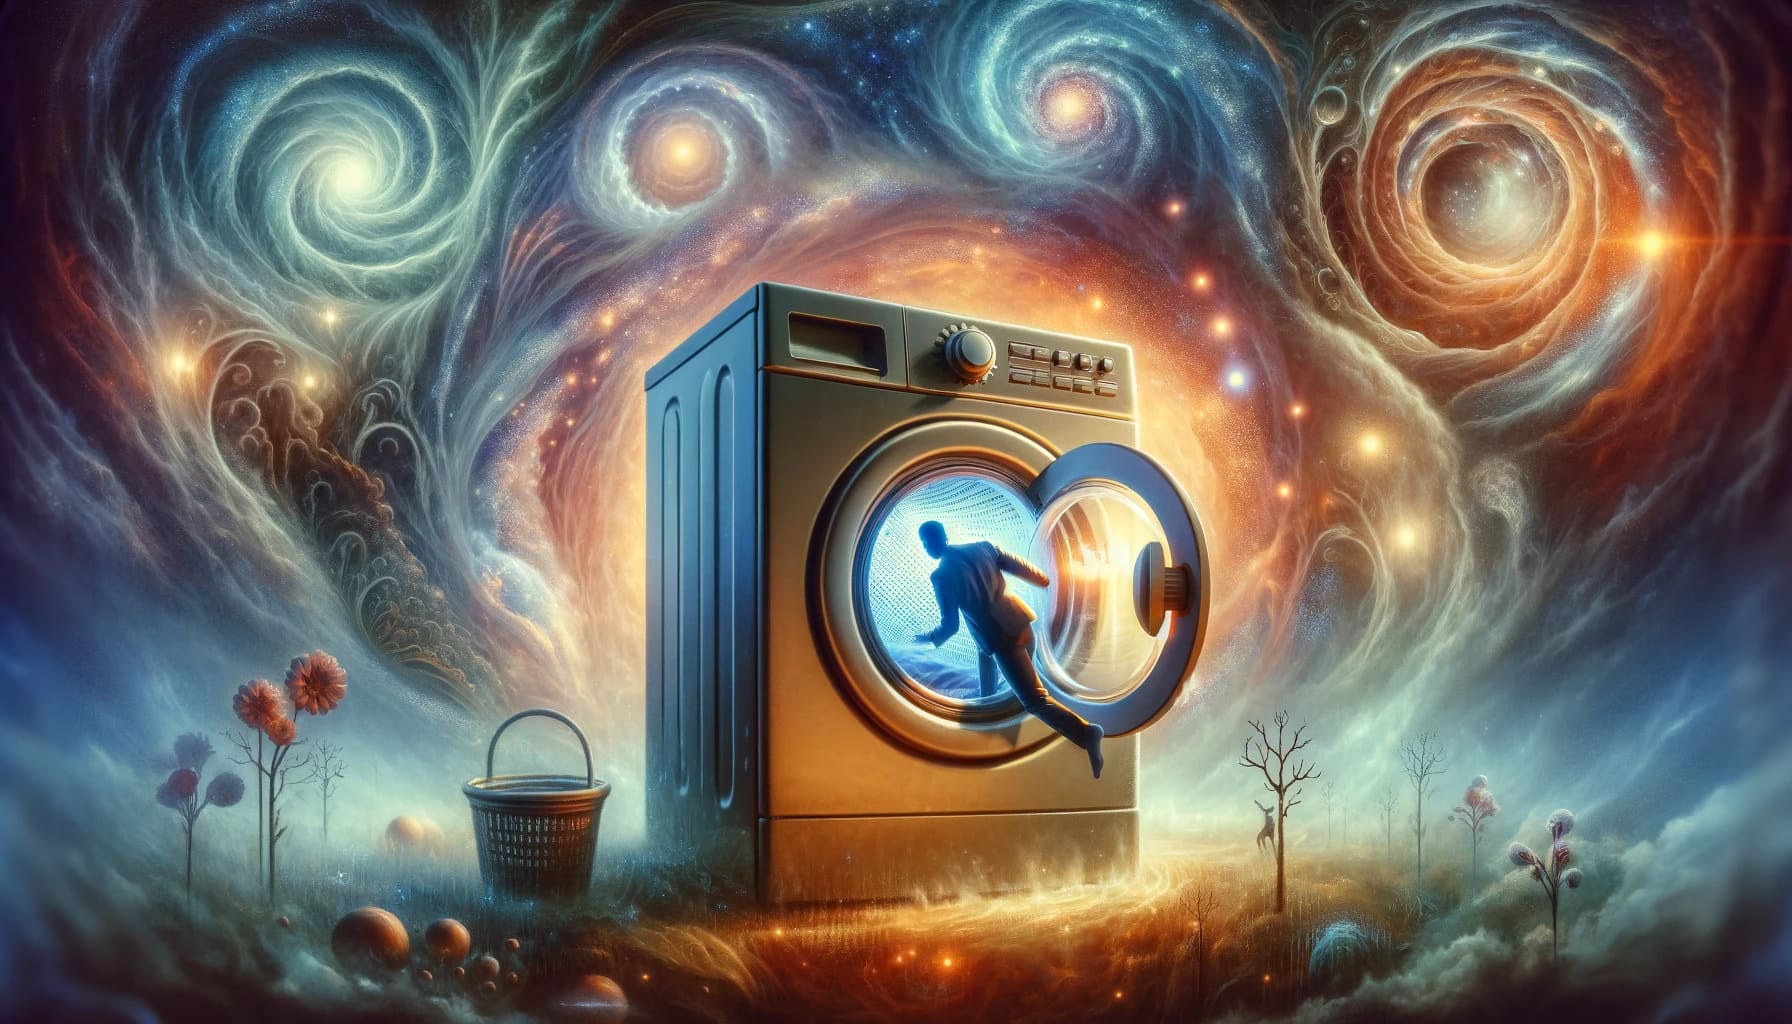 Spiritual Meaning of Putting My Father in a Washing Machine